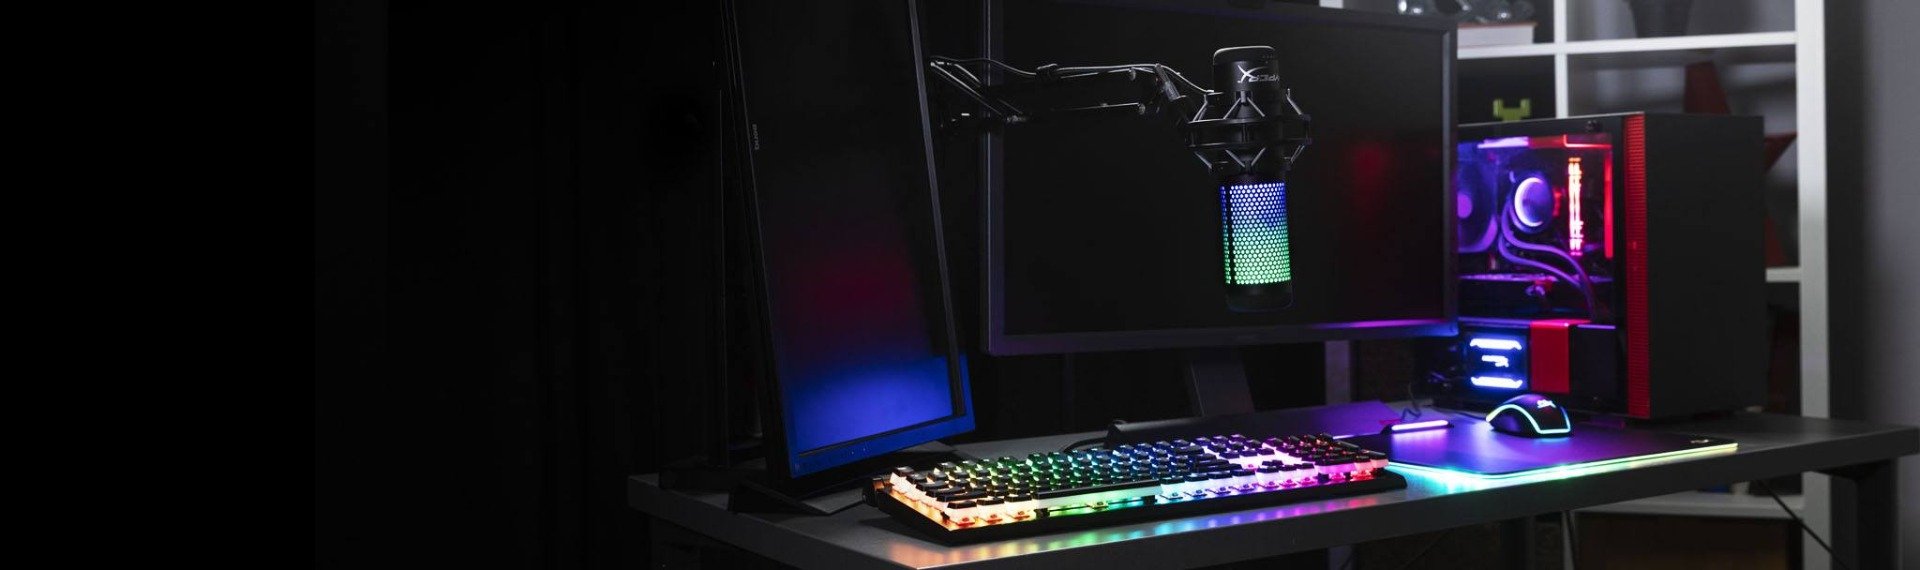 Radiant RGB lighting customizable with HyperX NGENUITY Software